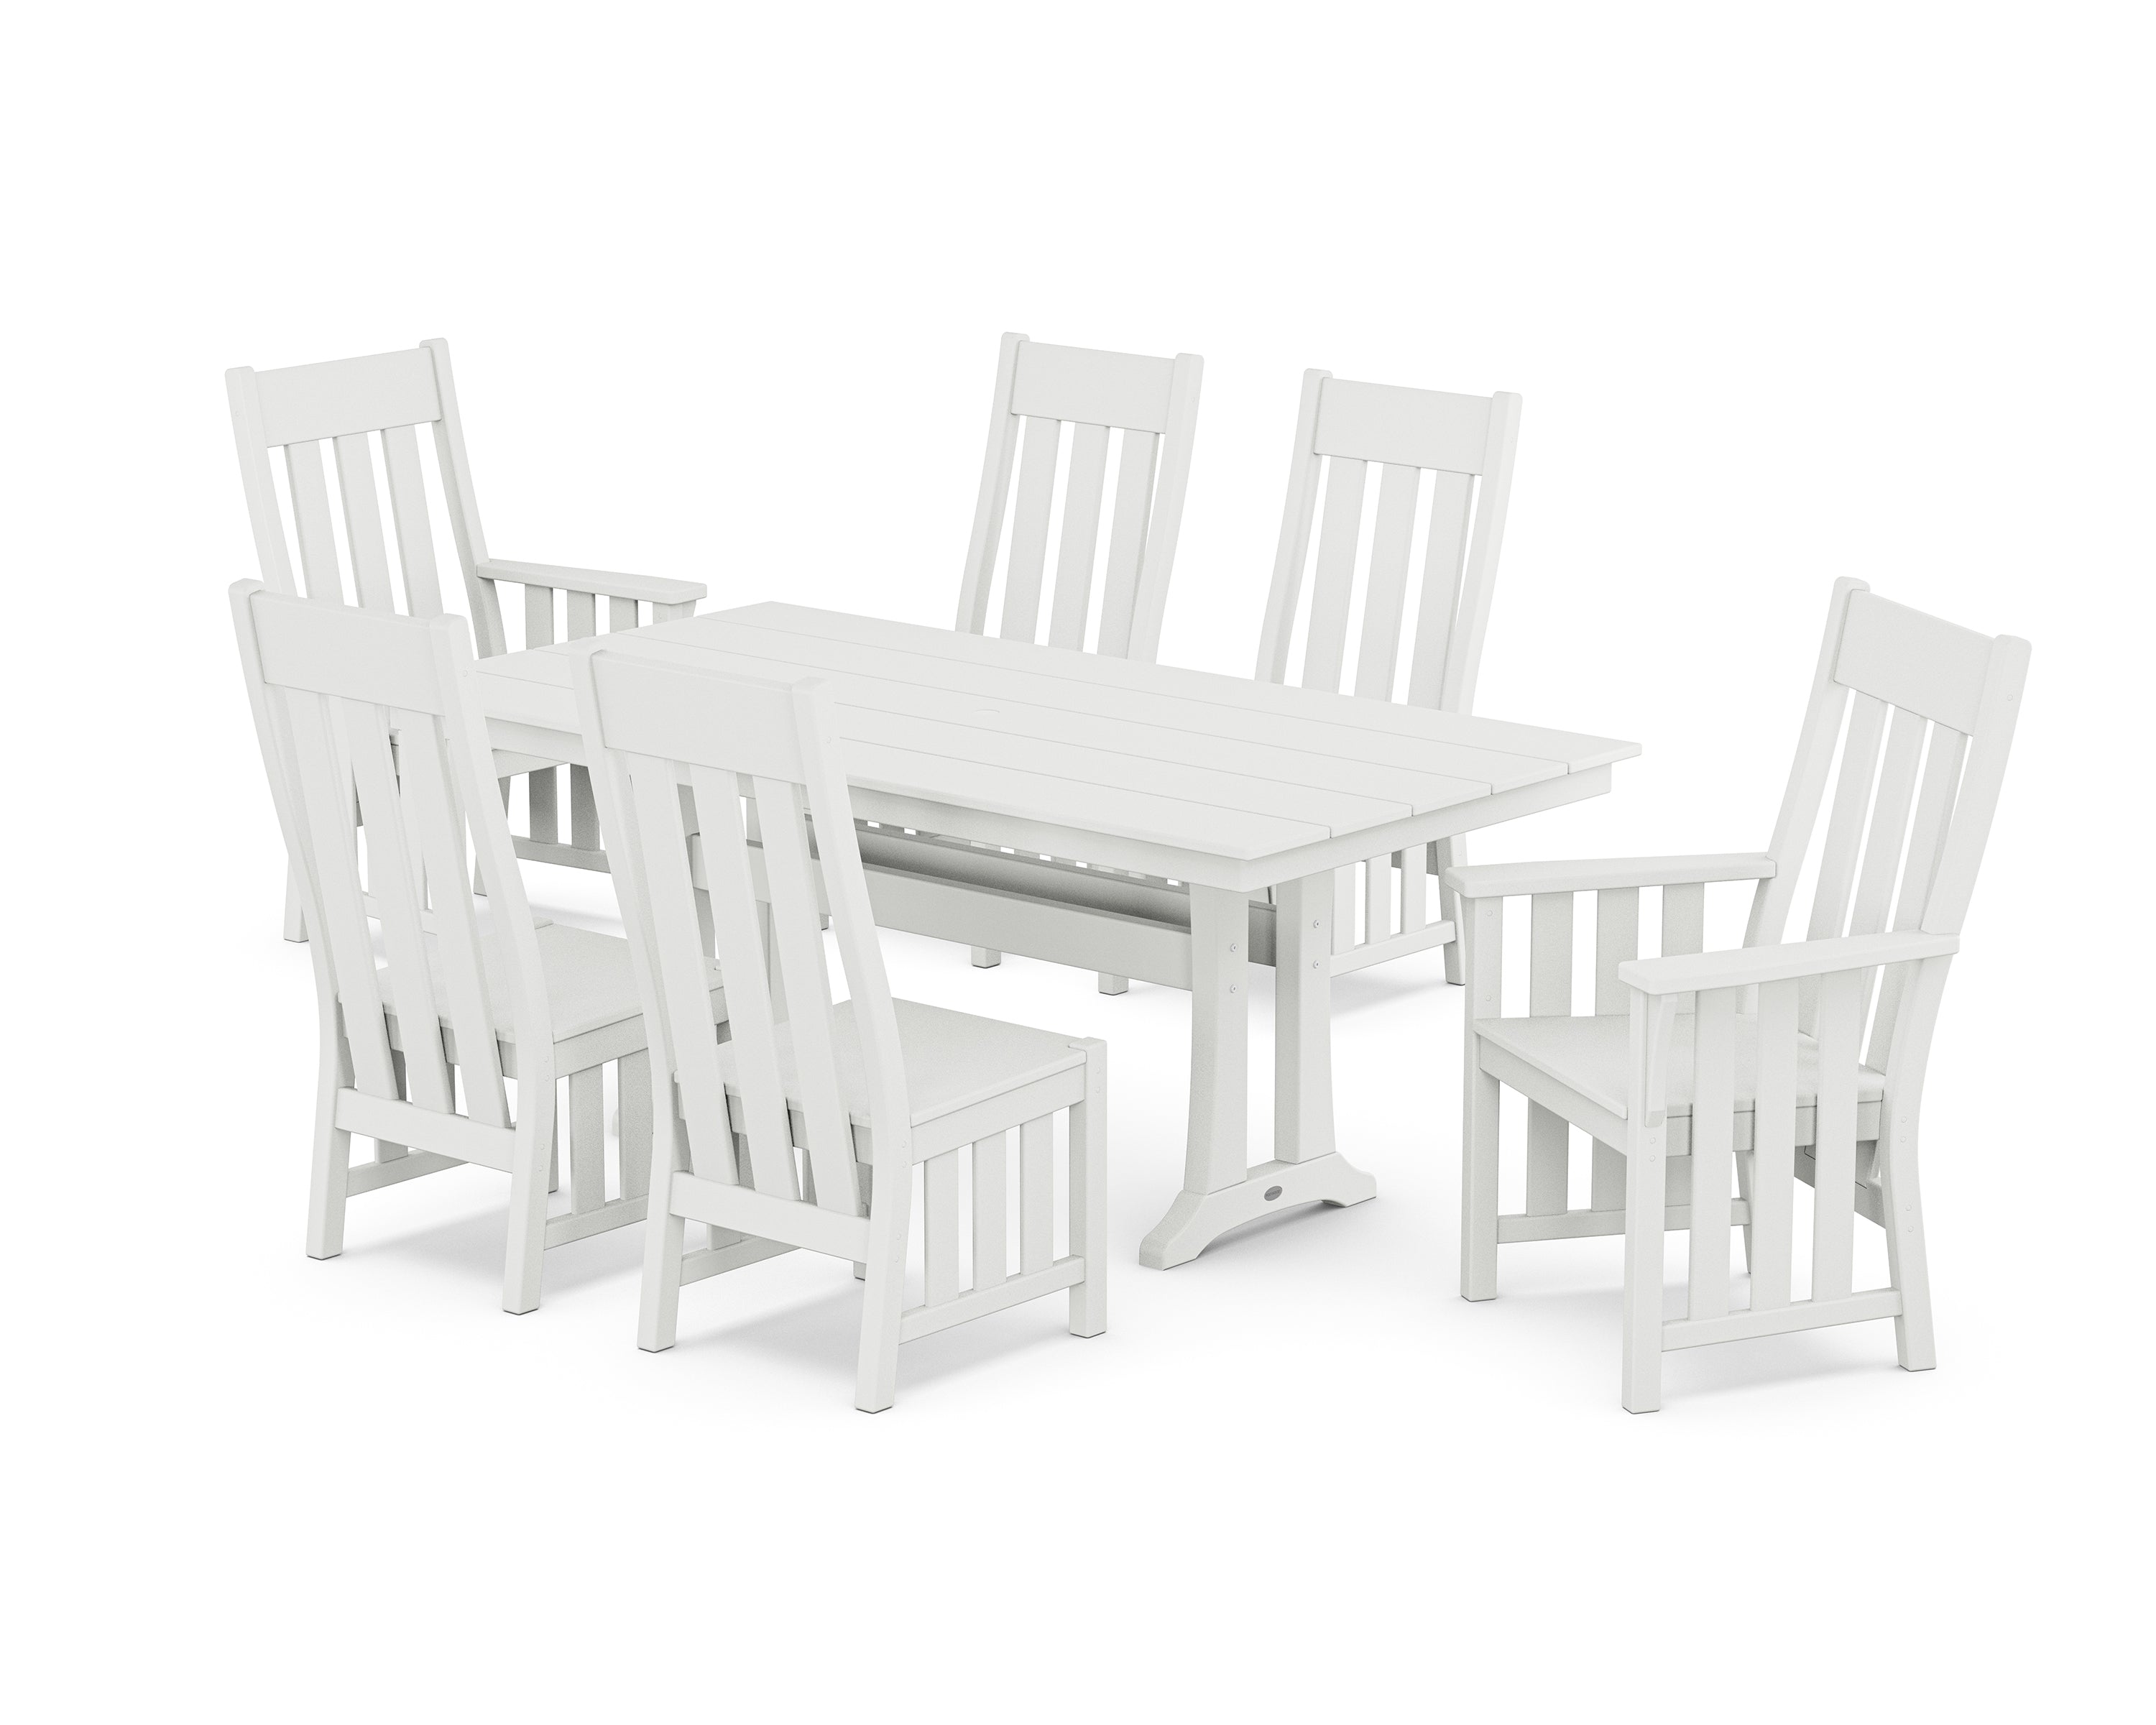 Martha Stewart by POLYWOOD® Acadia 7-Piece Farmhouse Dining Set with Trestle Legs in White